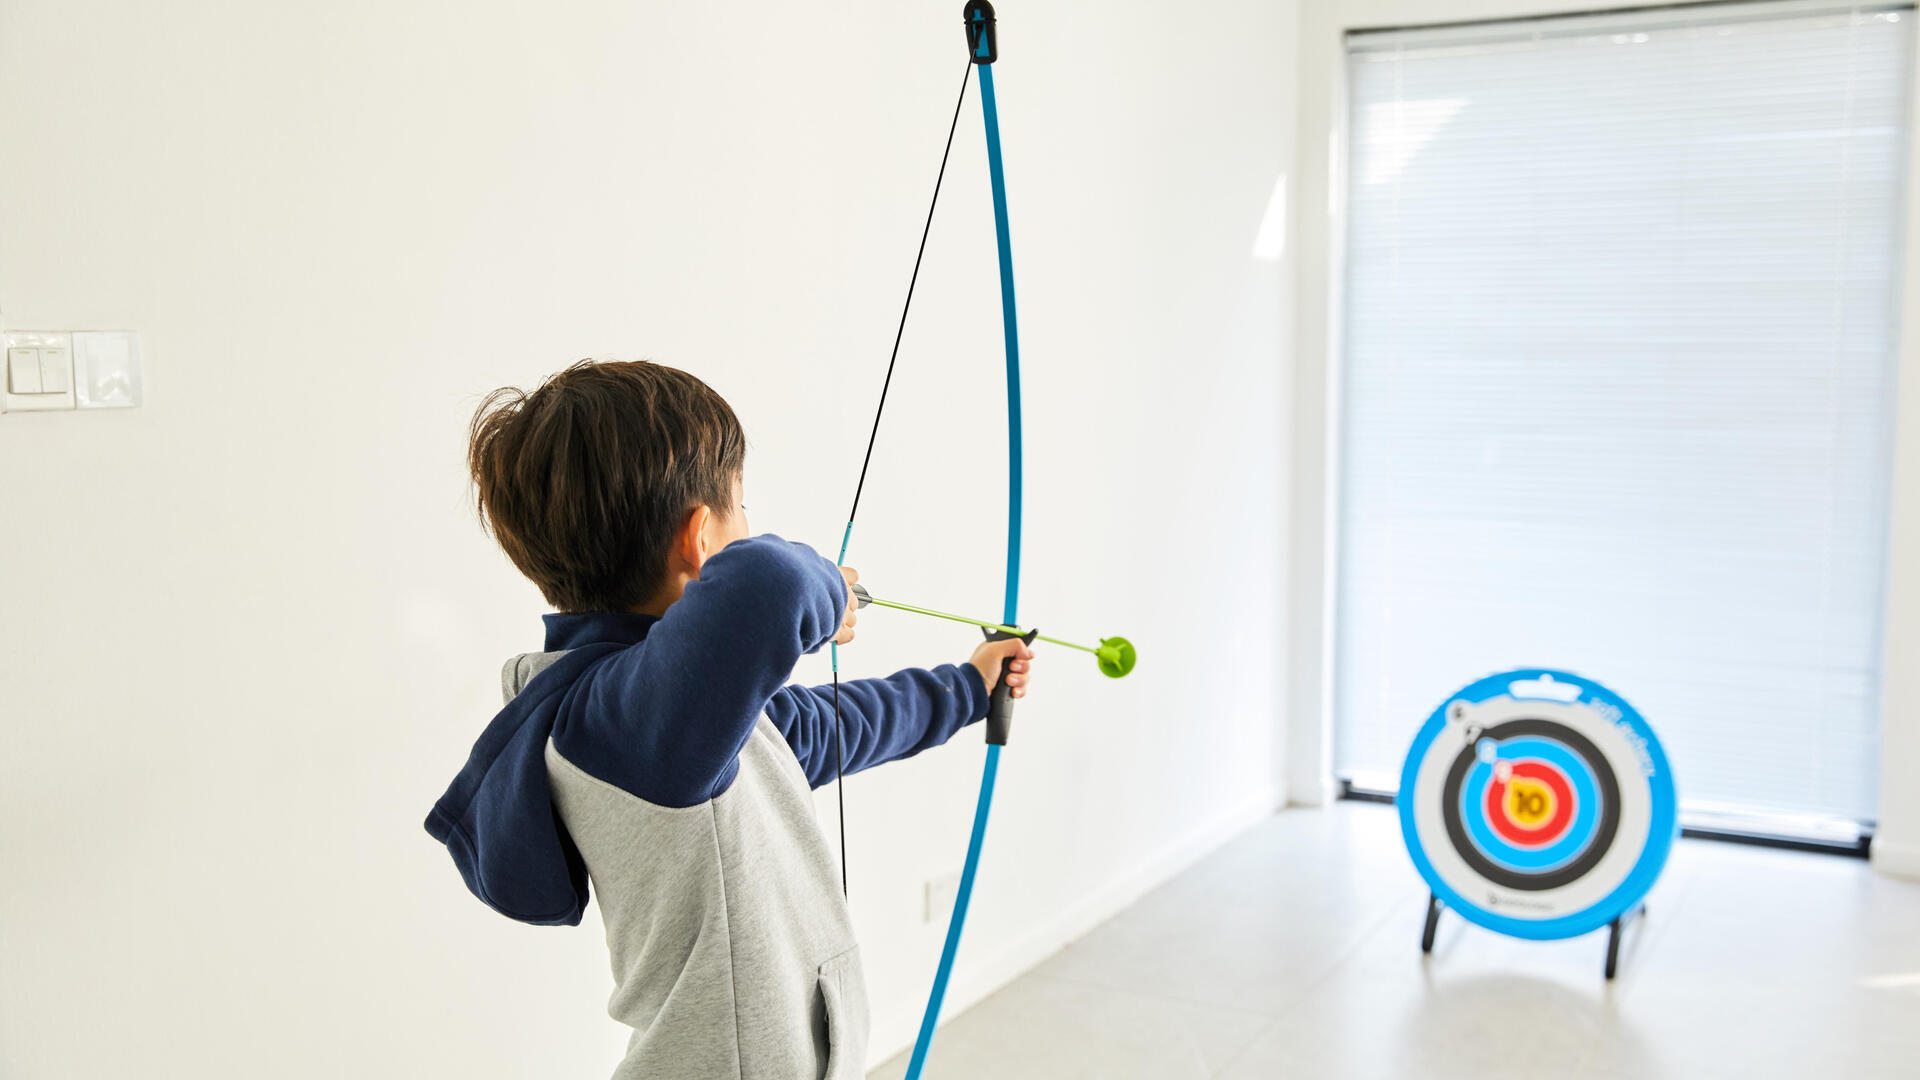 young boy playing with a Softarchery kit